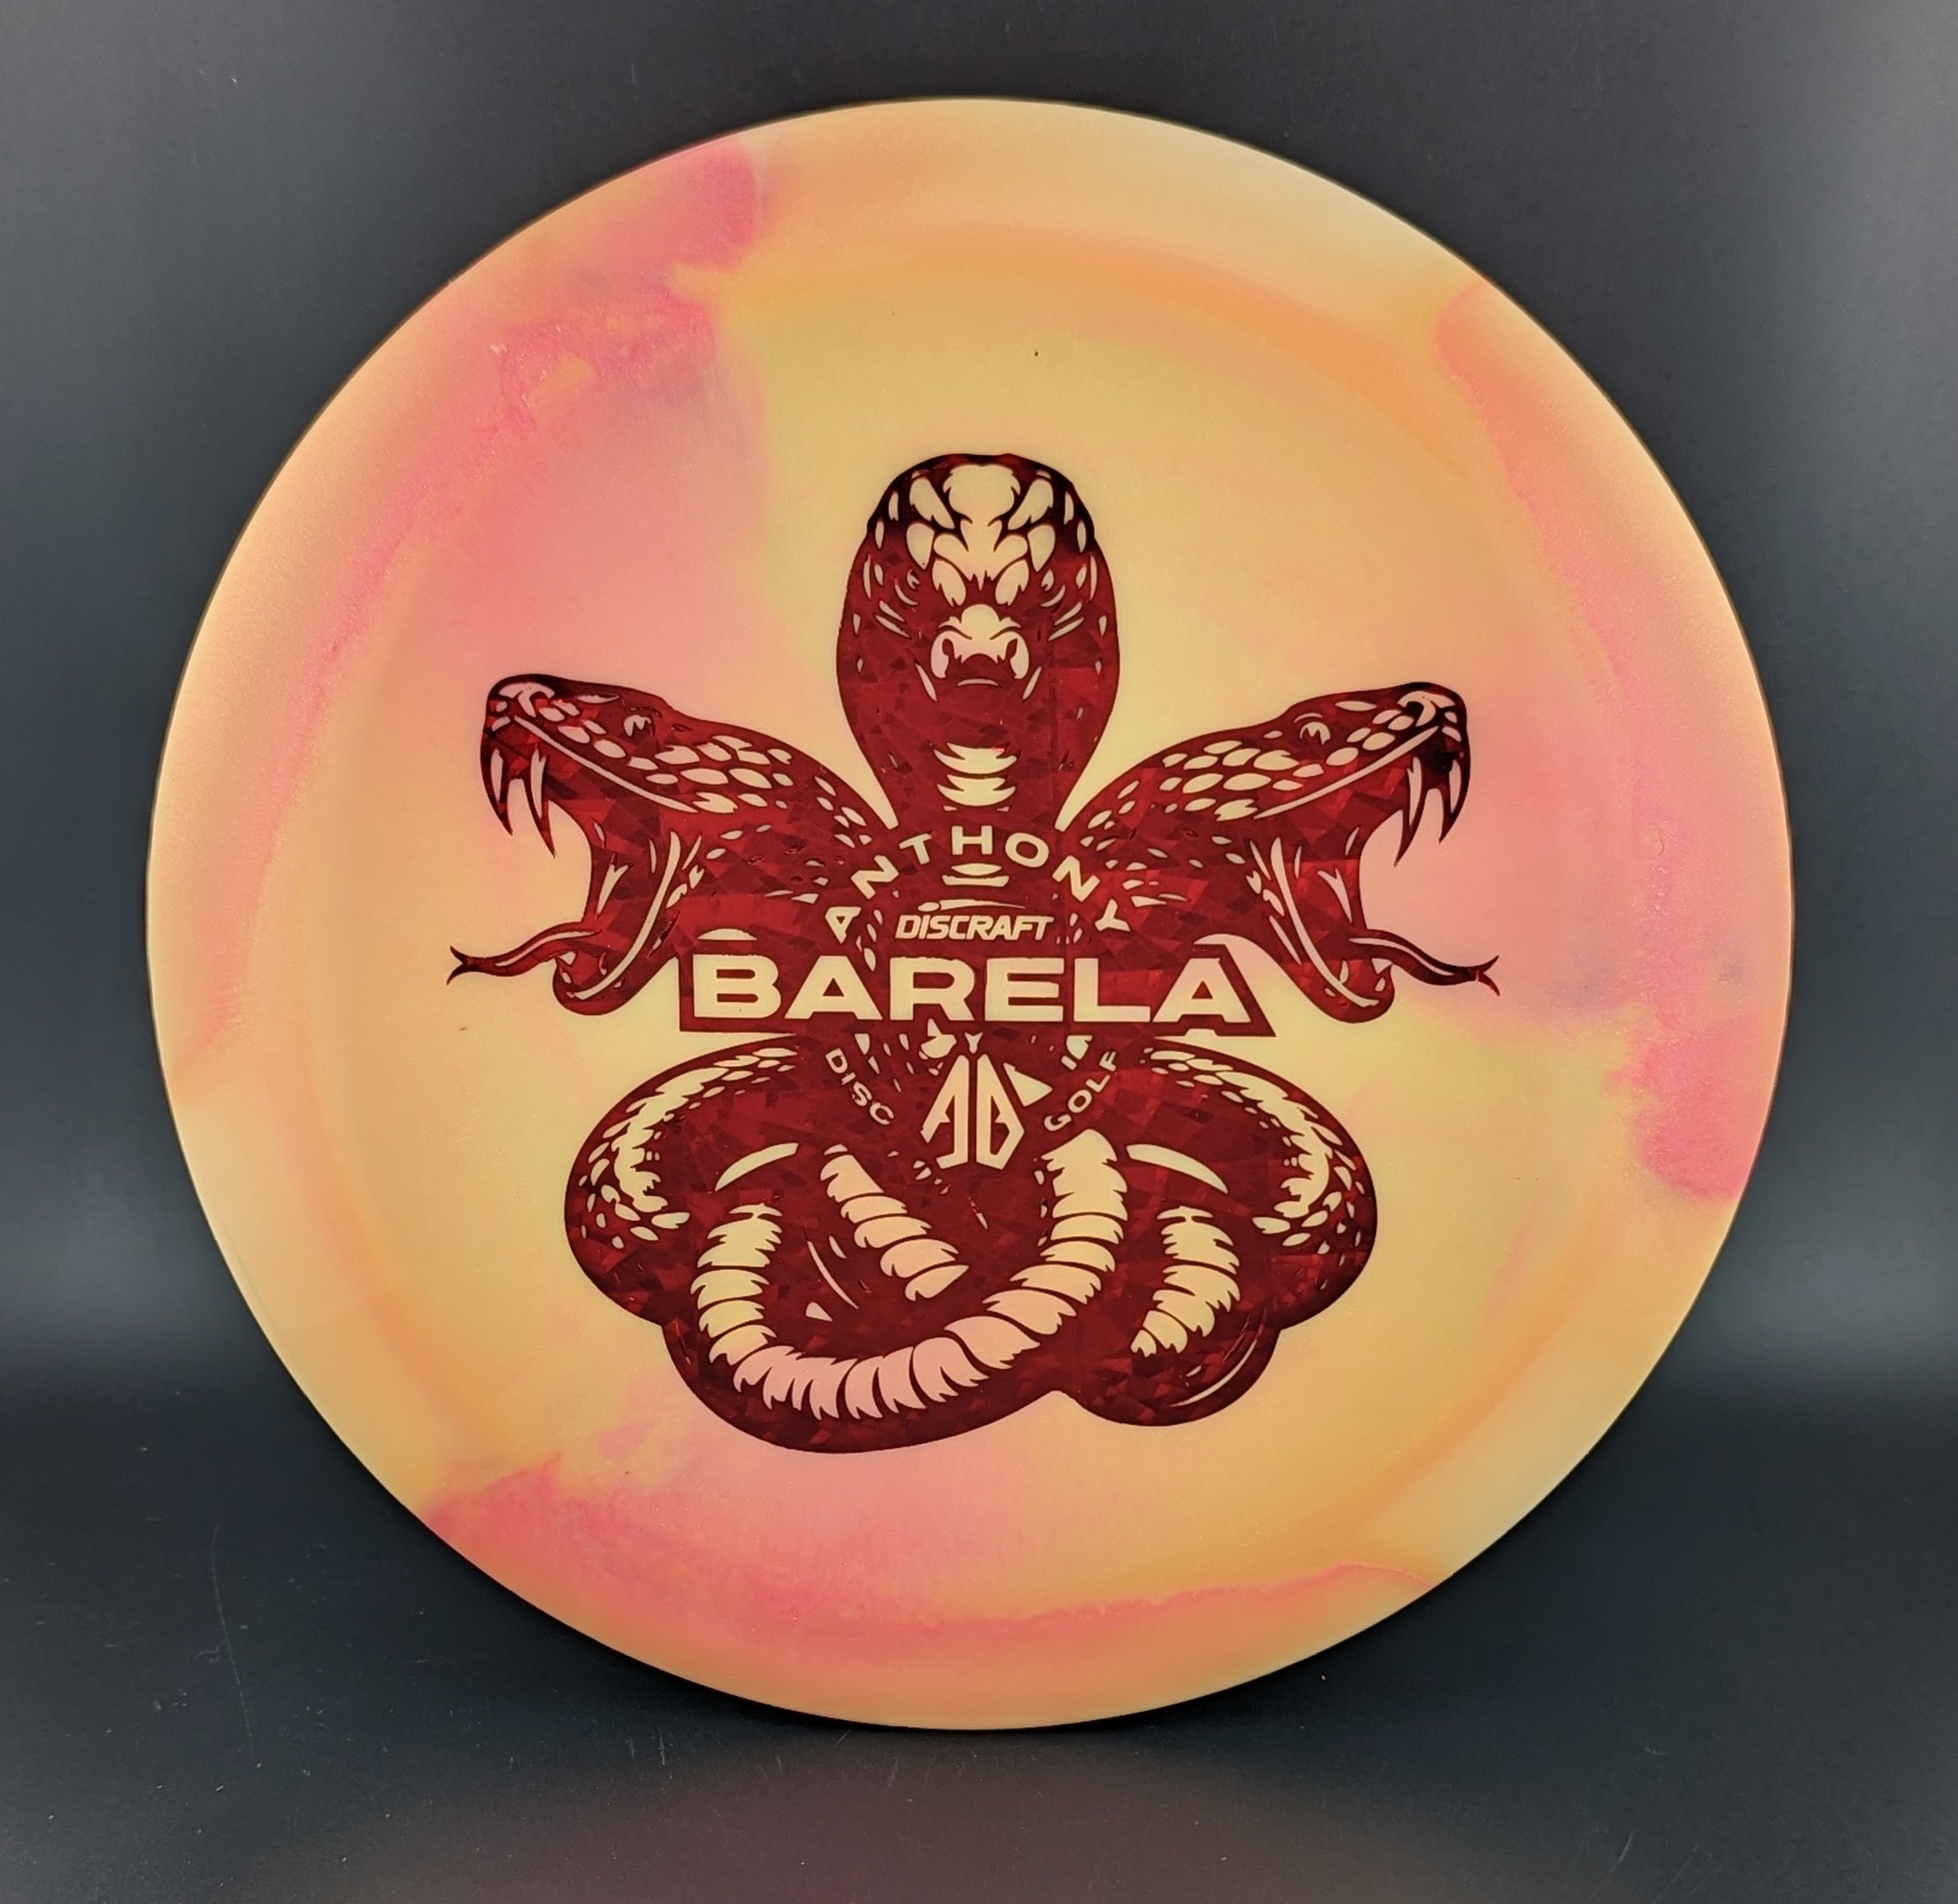 New Releases | The Disc Depot